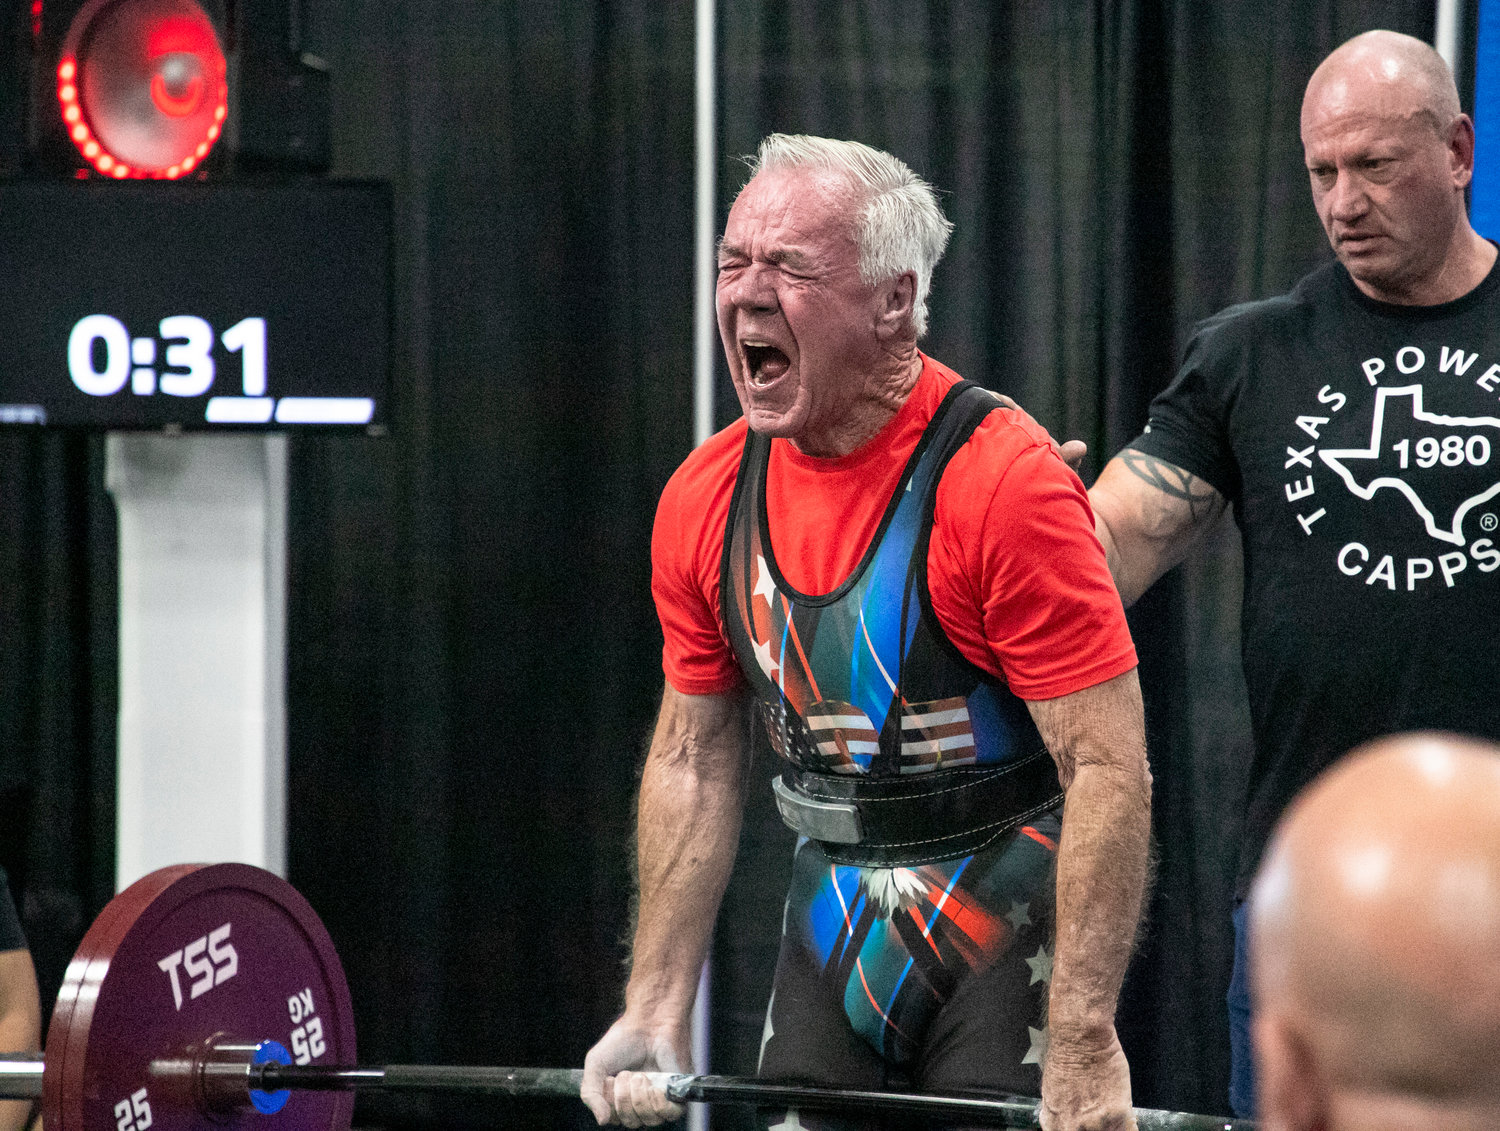 84-year-old Michael Harrington deadlifts a state record 297.6 pounds (135 kg) as part of Day 1 of competition at the International Powerlifting League’s world championship meet hosted at the Orange Beach Event Center.